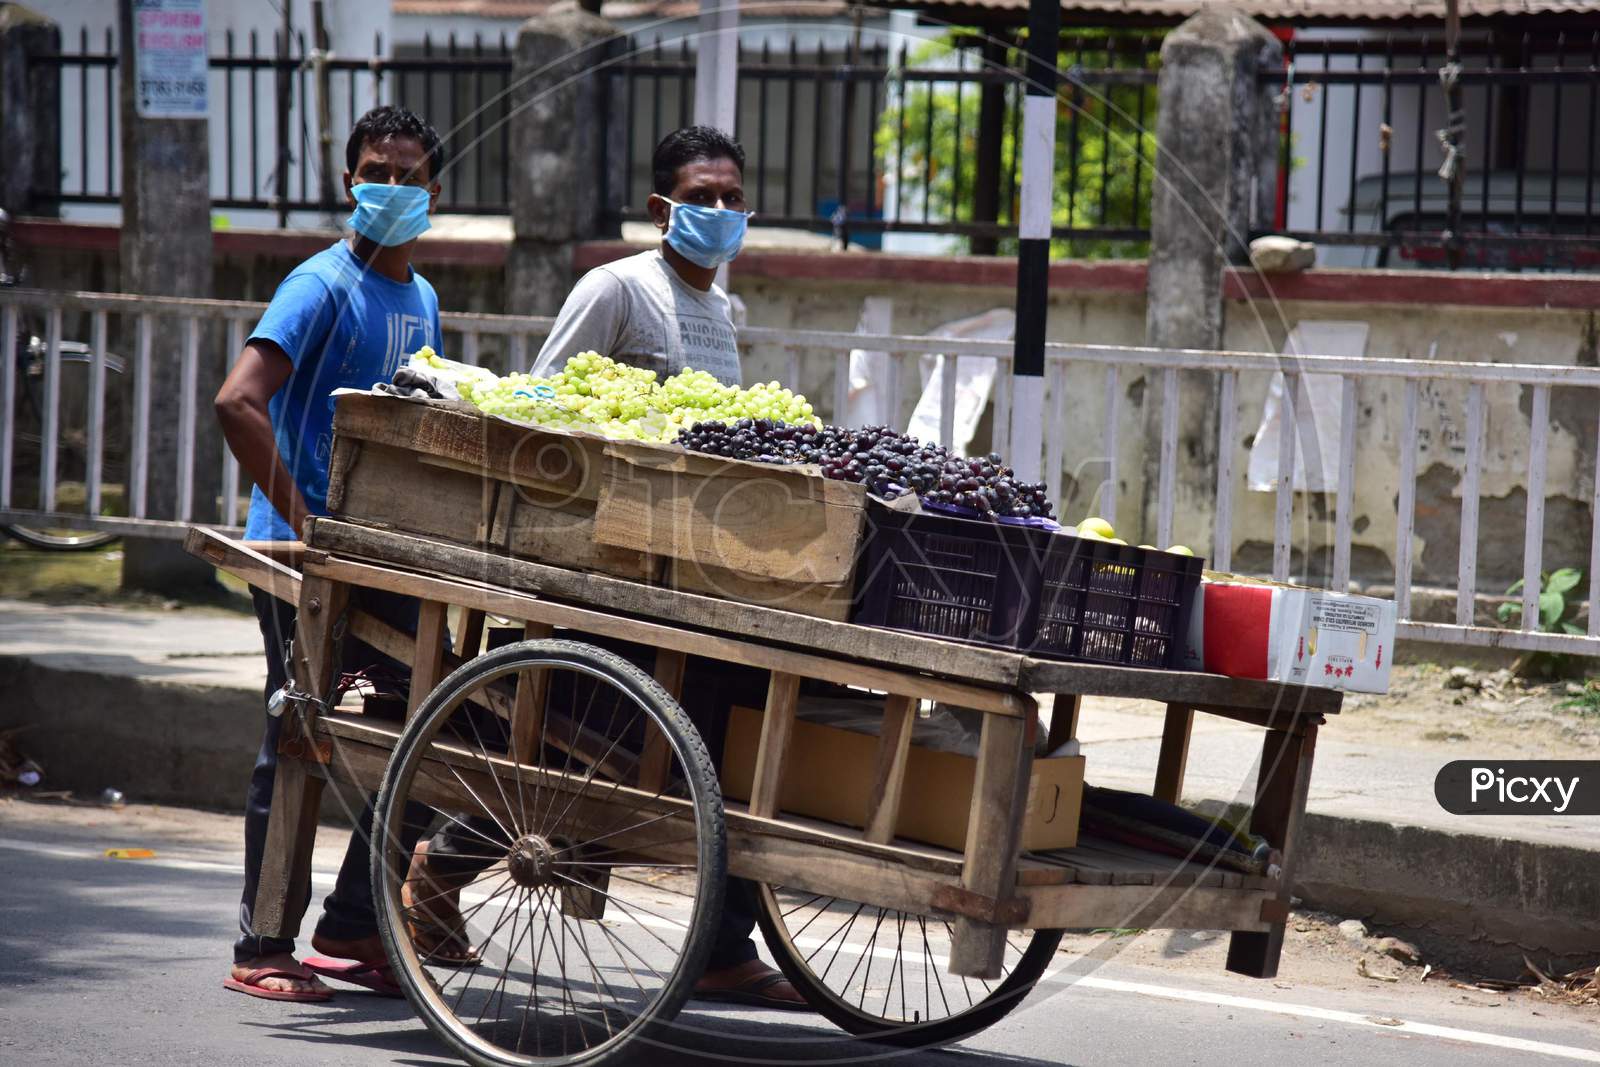 Nagaon :Vendor Carry Friuts On  His Cart  After Authorities Allowed Sale   With Certain Restrictions, During The Ongoing Covid-19 Nationwide Lockdown In Nagaon District Of Assam On May 04,2020 ..Pix By Anuwar Hazarika